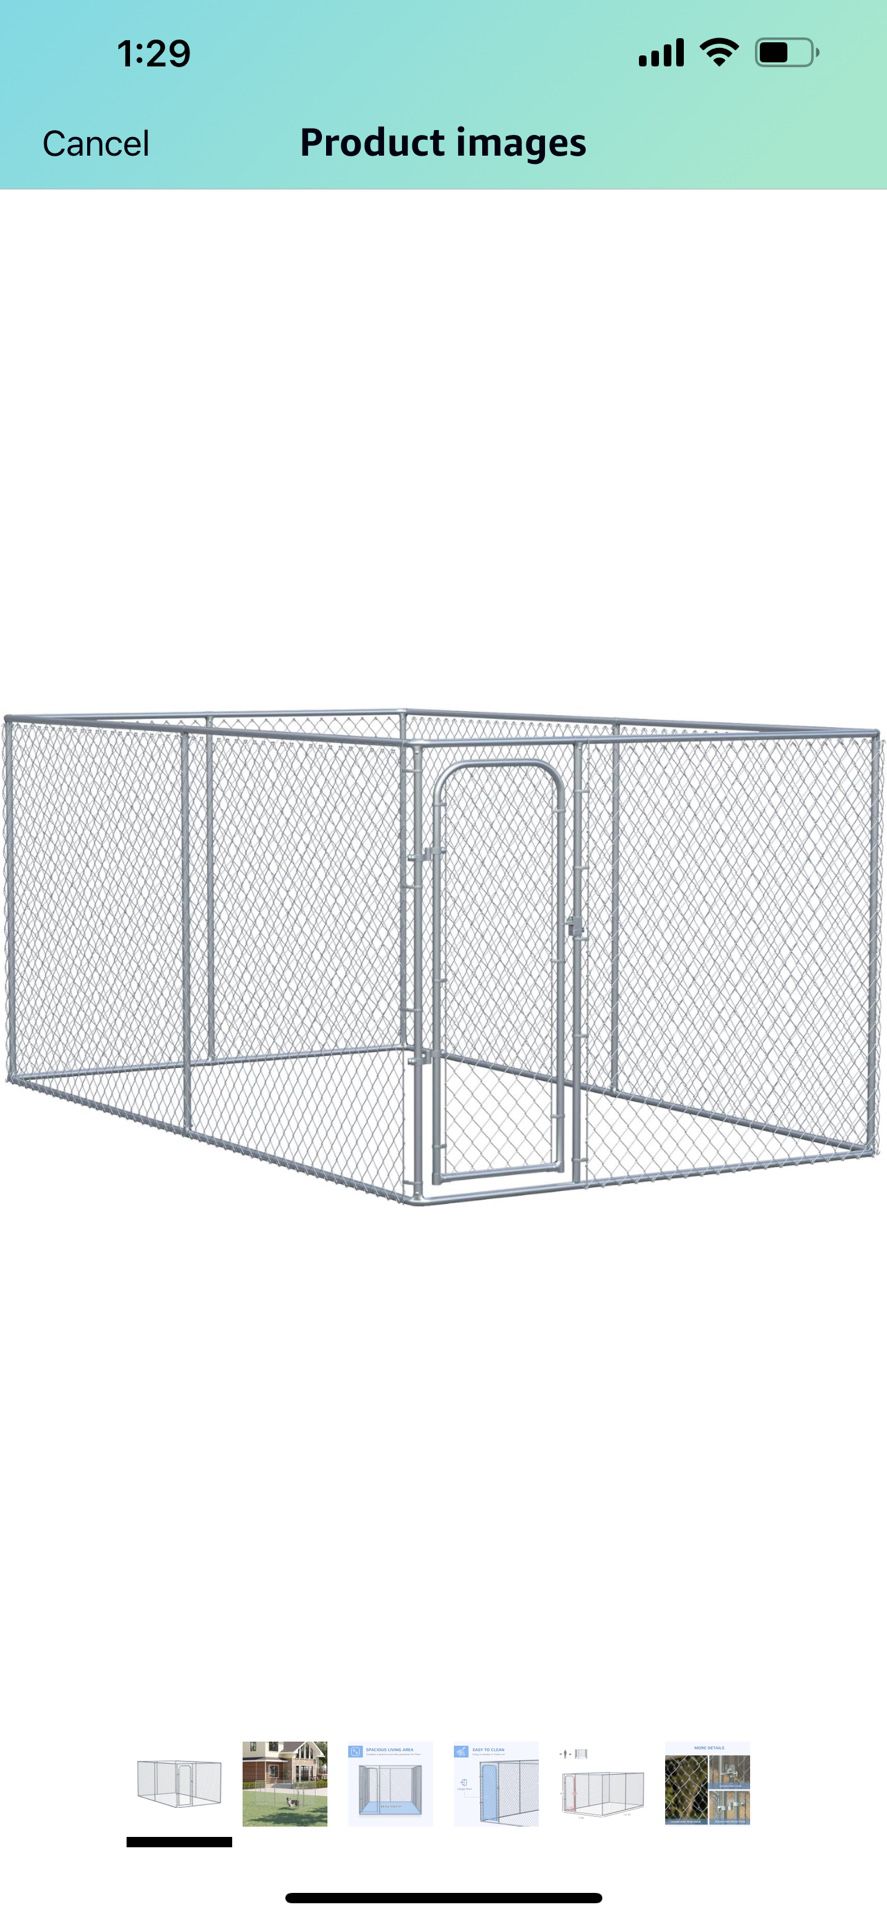 New in box PawHut Large Dog Kennel Outside, Heavy Duty Dog Cage, Outdoor Fence Dog Run with Galvanized Chain Link, Secure Lock, 13.1' x 7.5' x 6' D02-